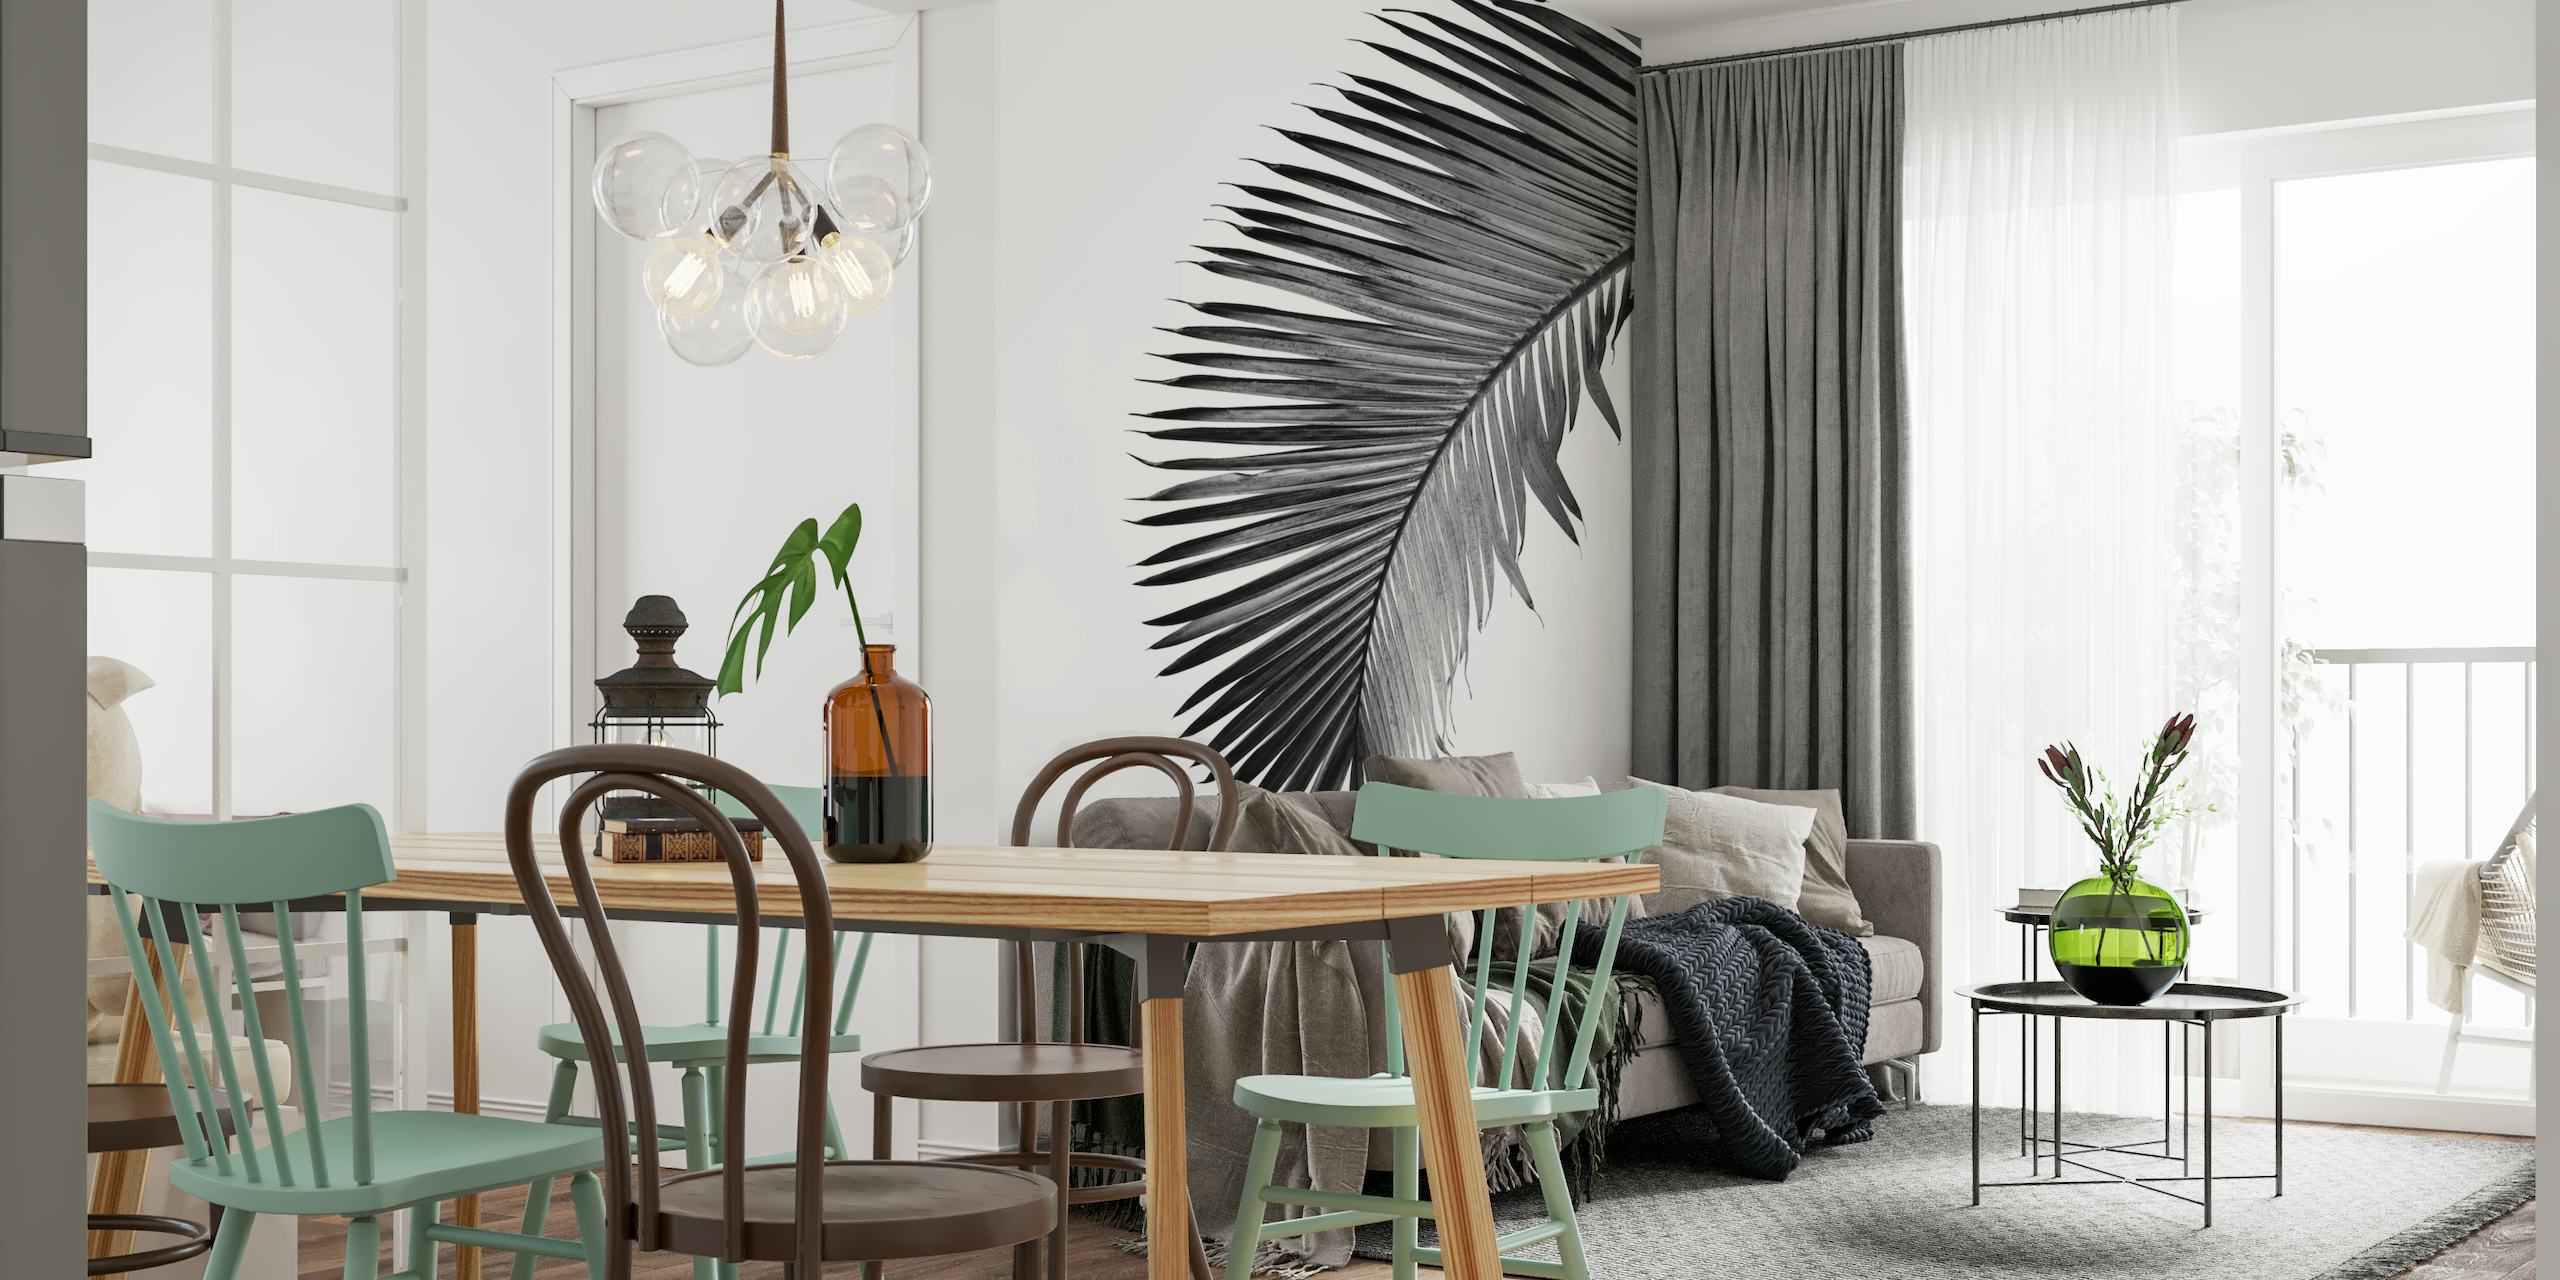 Monochrome Palm Leaf Wall Mural for contemporary style decor